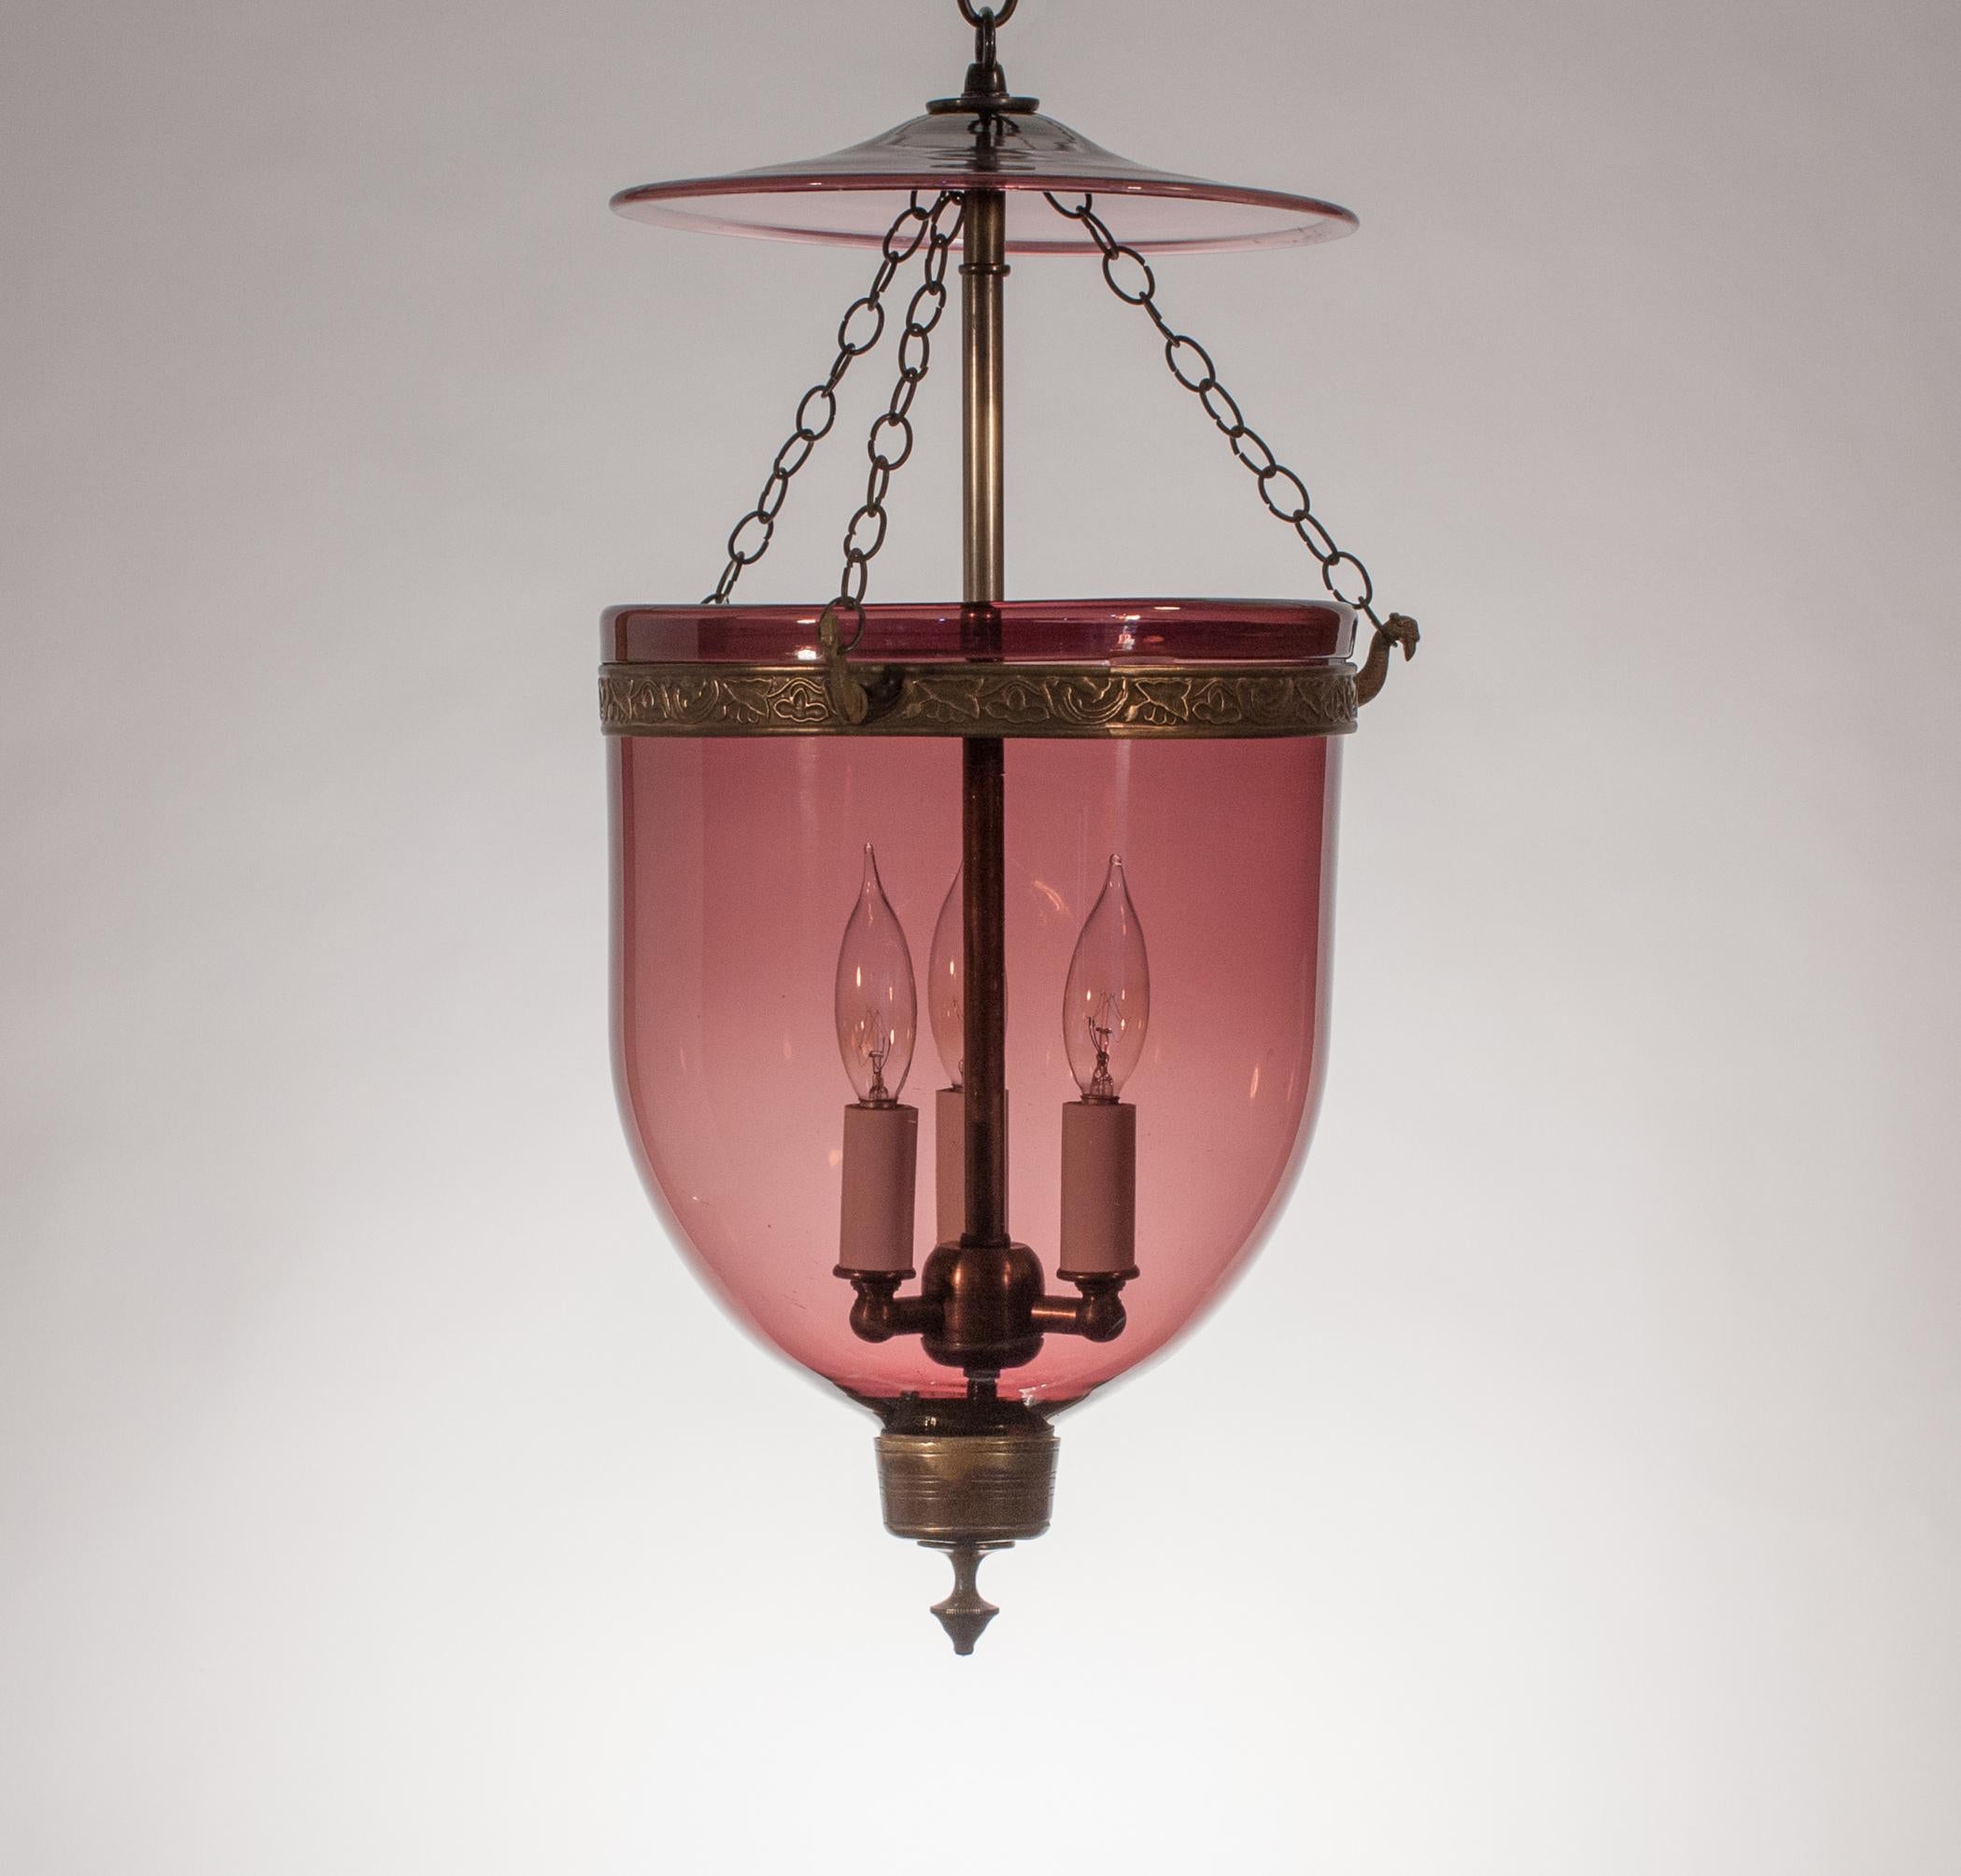 A truly beautiful Amethyst bell jar lantern from England. This circa 1860 lantern has Classic form, and the colored glass emanates a very subtle hue. The pendant is in very good condition, with several desirable bubbles and swirls in the hand blown